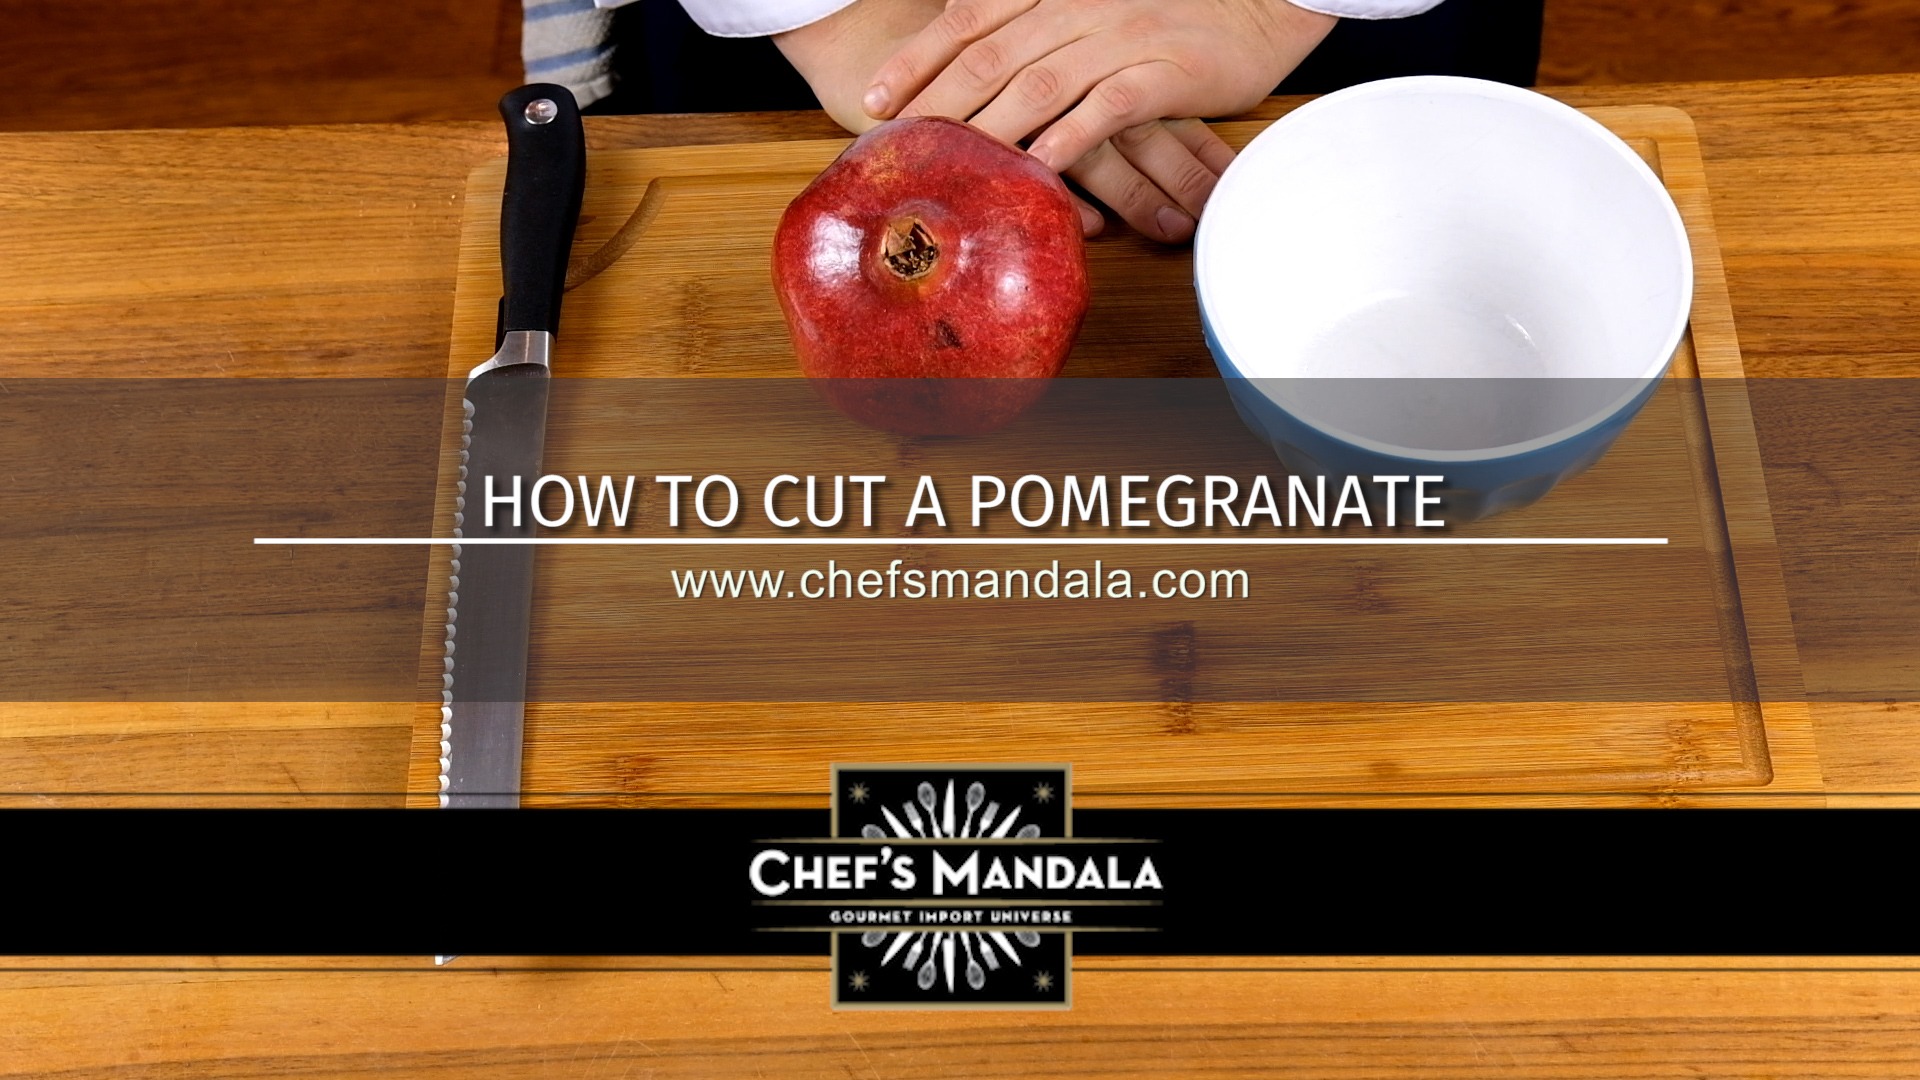 HOW TO CUT A POMEGRANATE